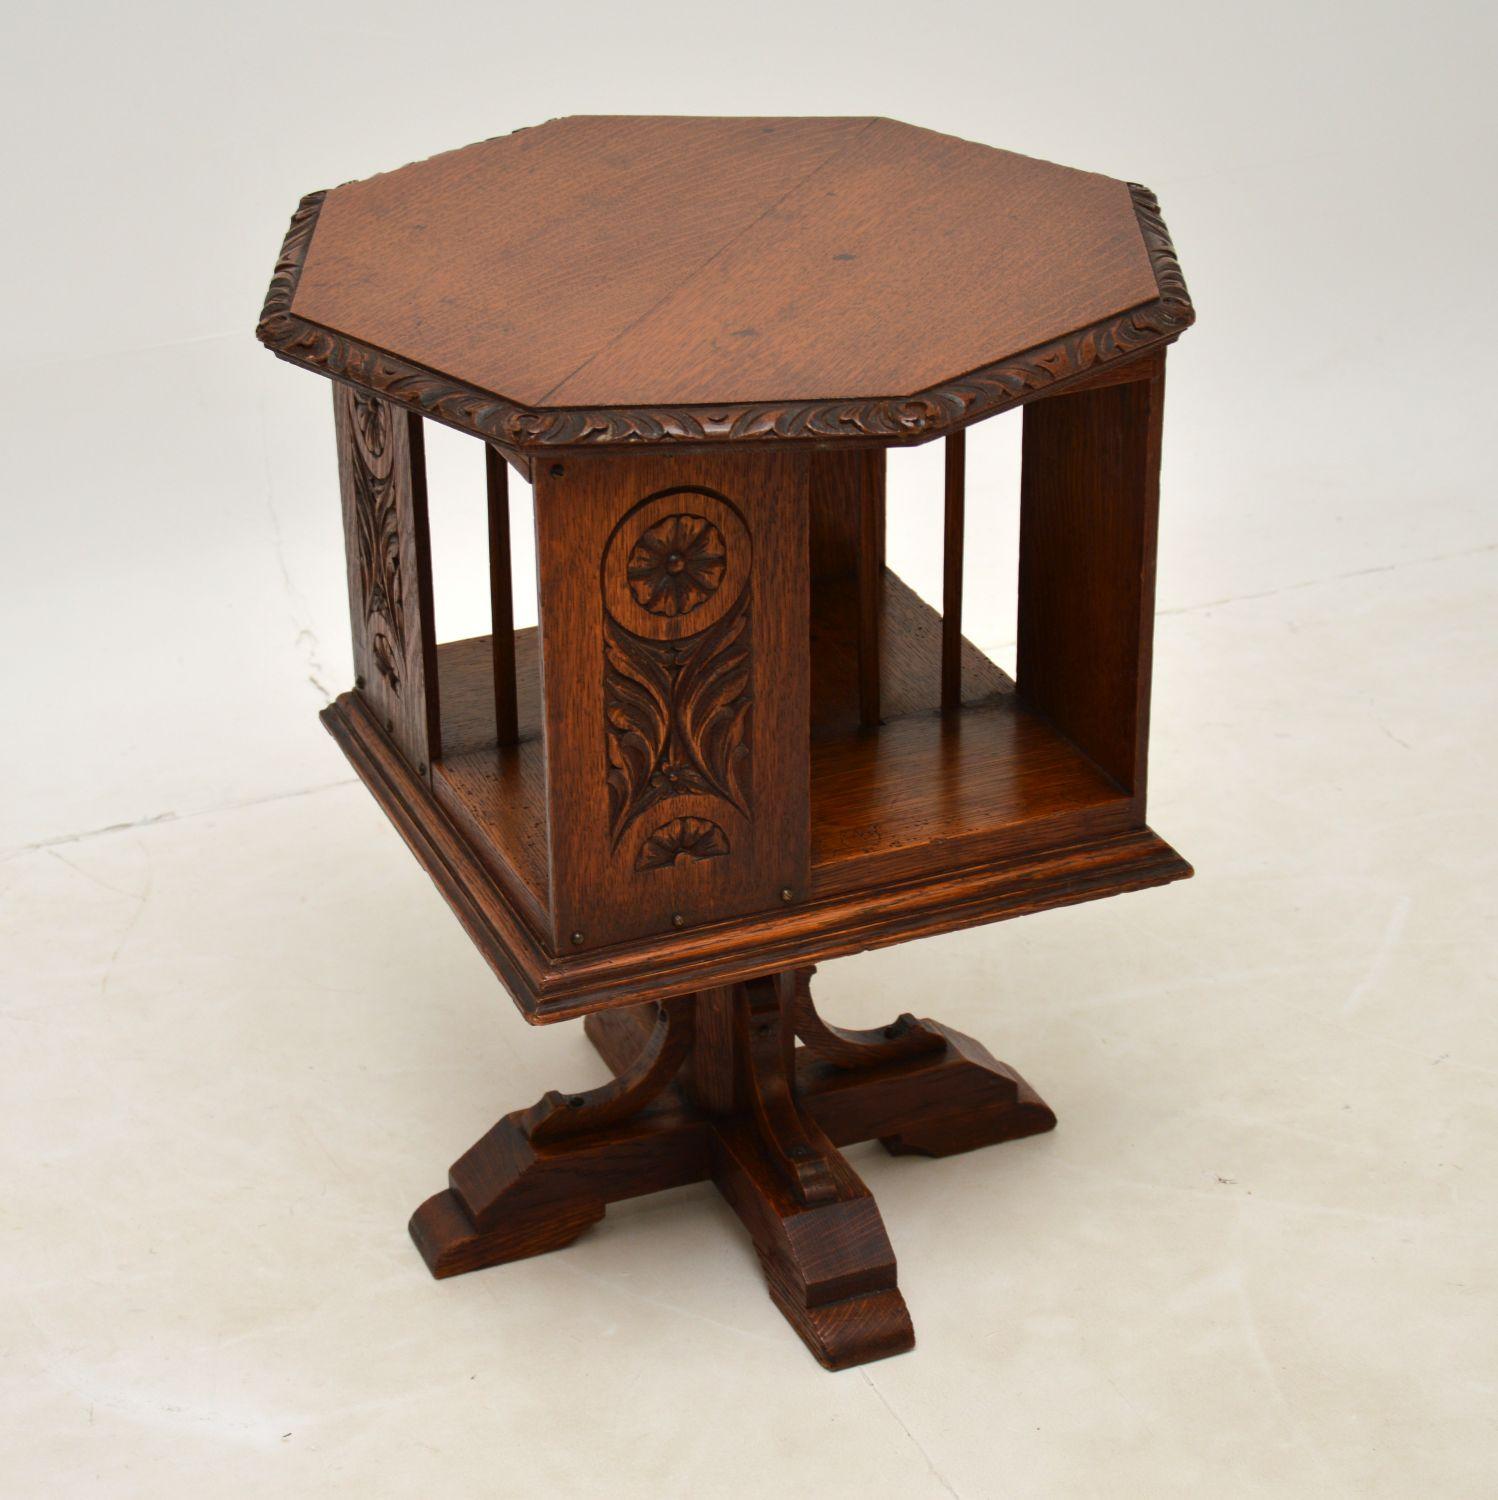 A wonderful small antique Arts & Crafts period revolving bookcase stand in solid oak, dating from around the 1890-1900 period.
It is very well made, is of super quality and is a very useful size. It’s solid oak throughout, with fine carving and a